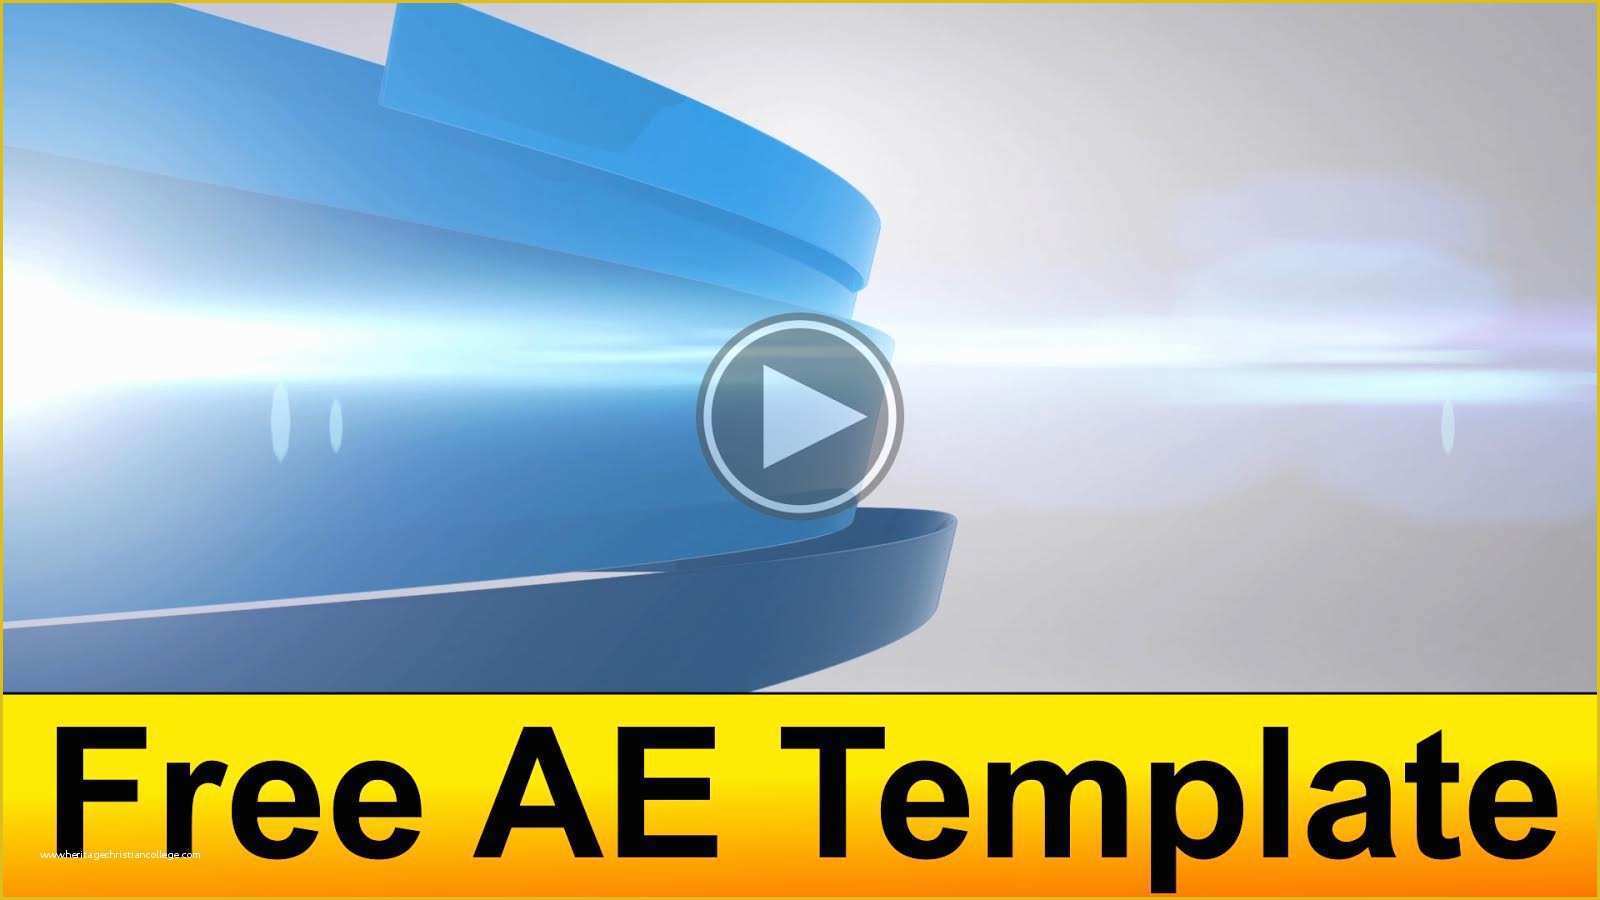 Free Ae Templates Of Free after Effects Templates Vs Premium Paid Templates